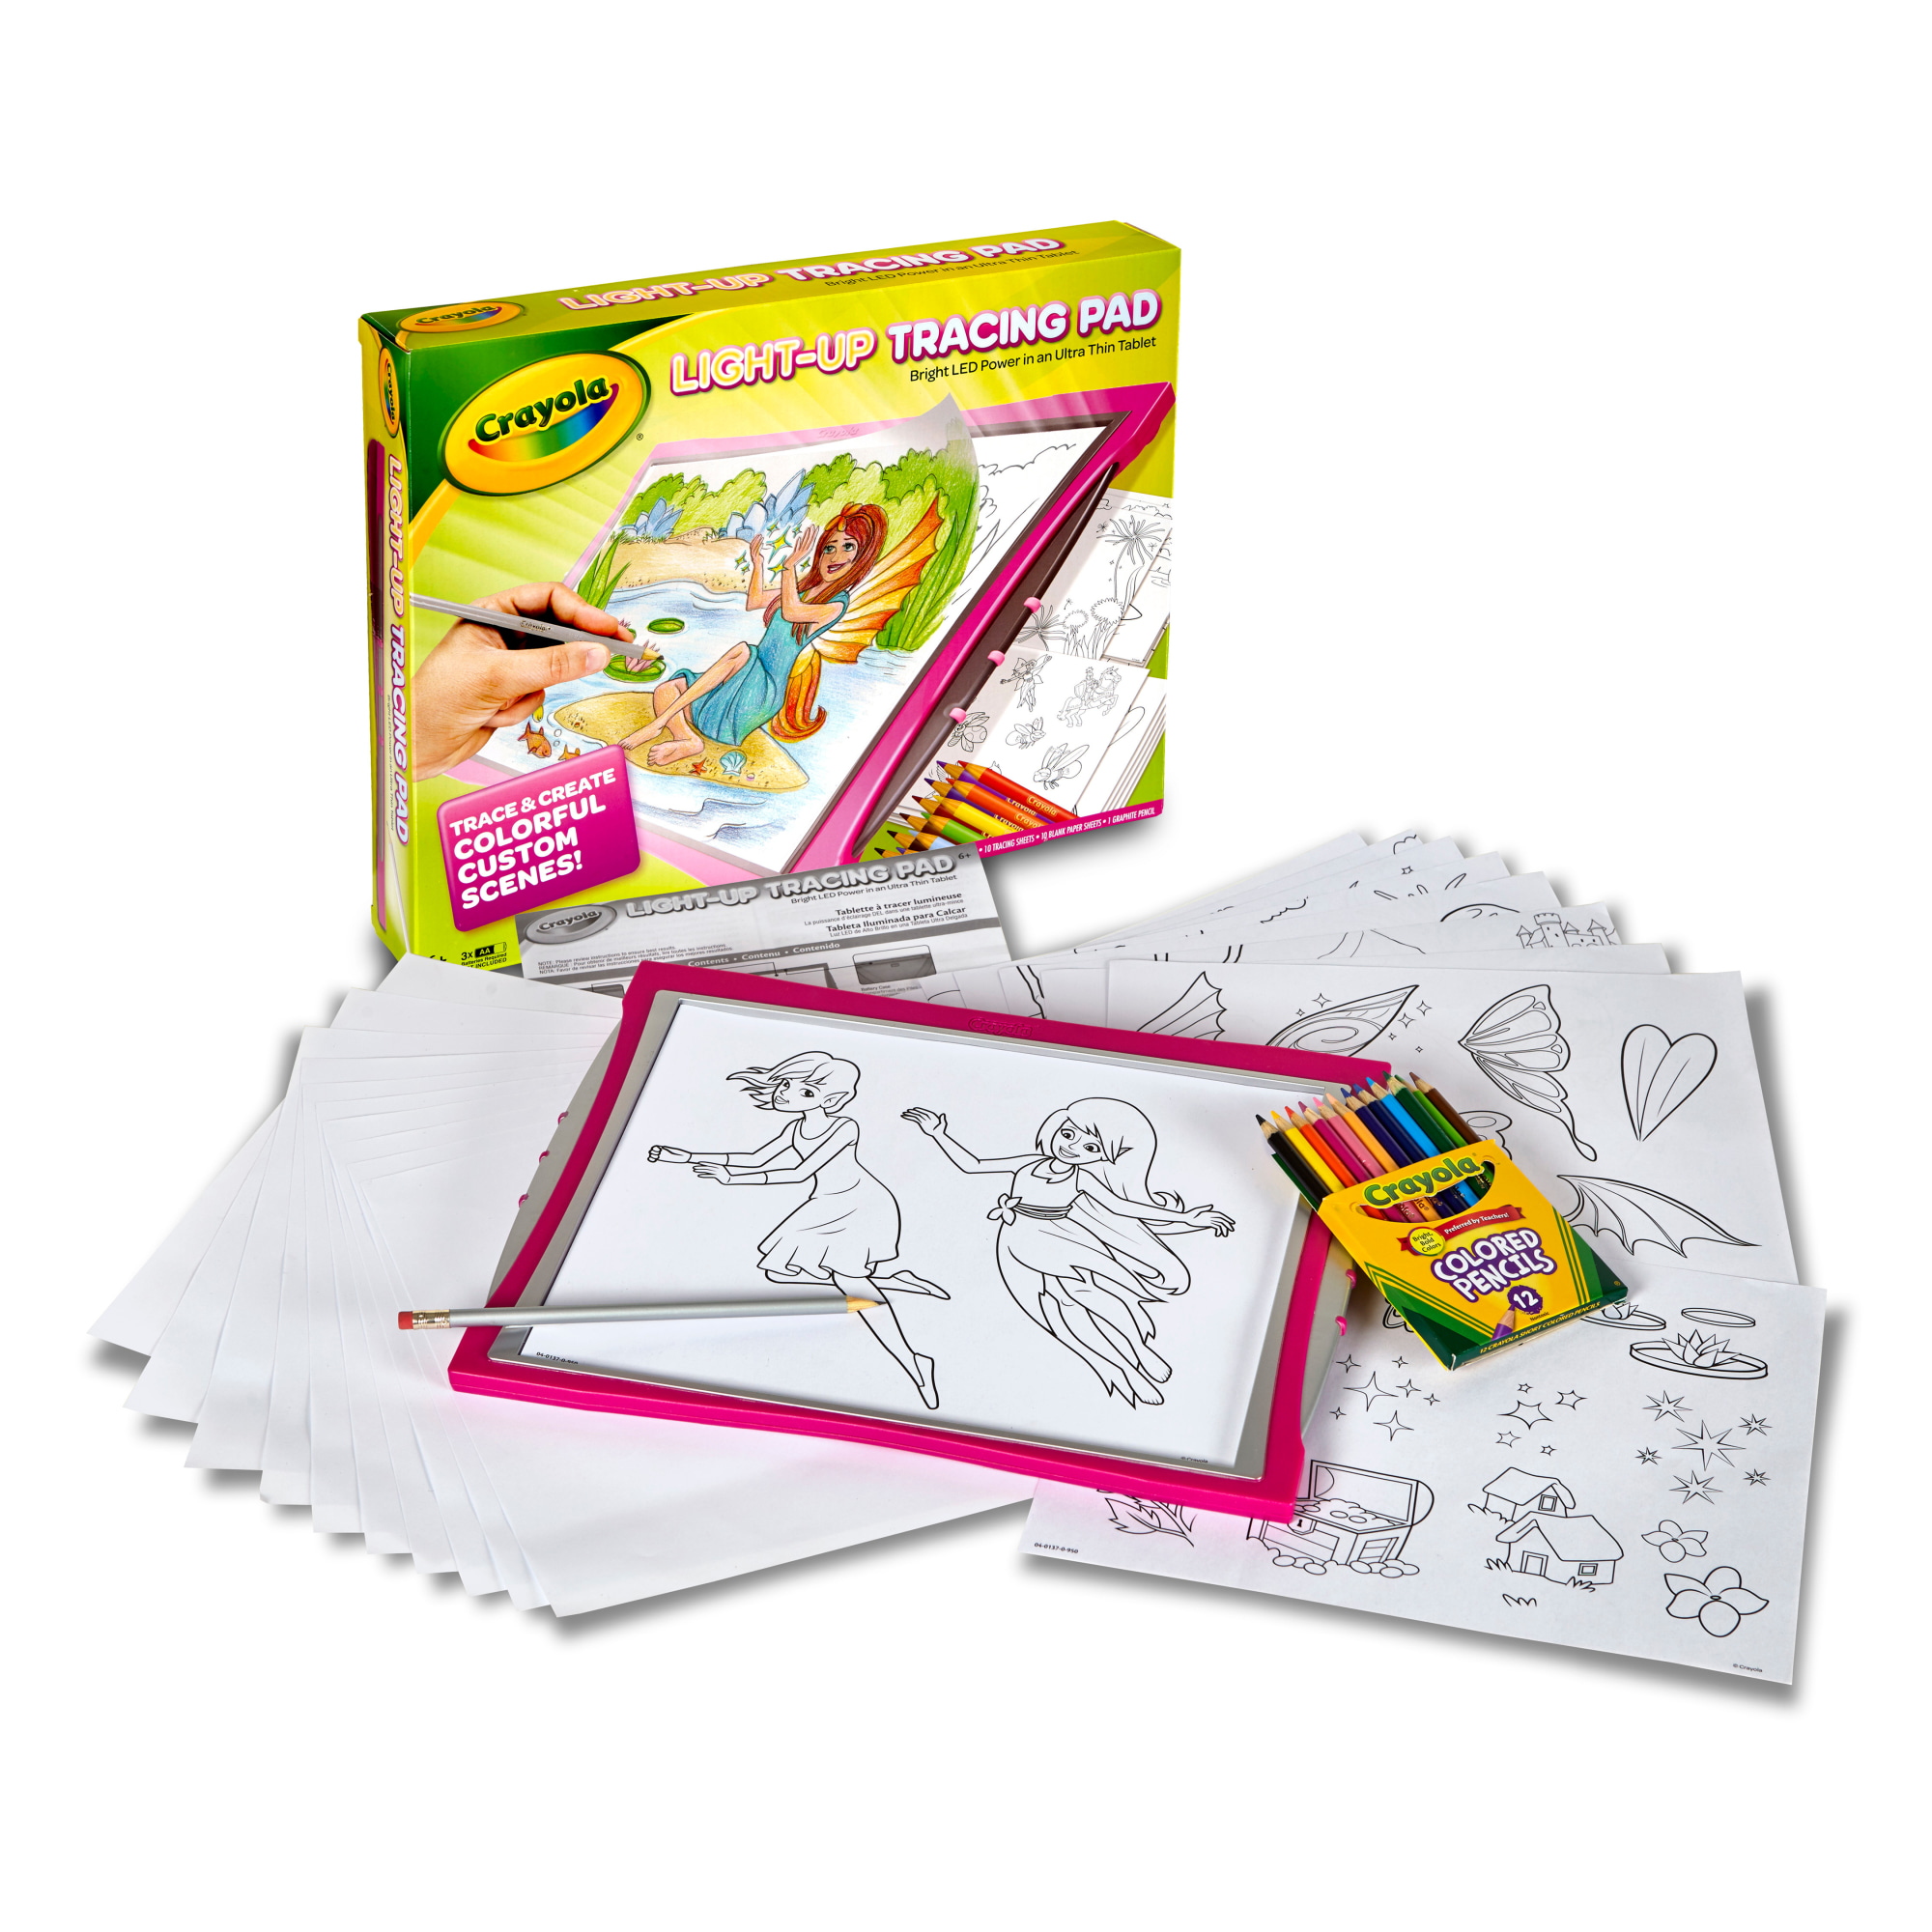 Crayola Light-up Tracing Pad Pink, Gifts for Unisex Child, Ages 6, 7, 8, 9 - image 2 of 7